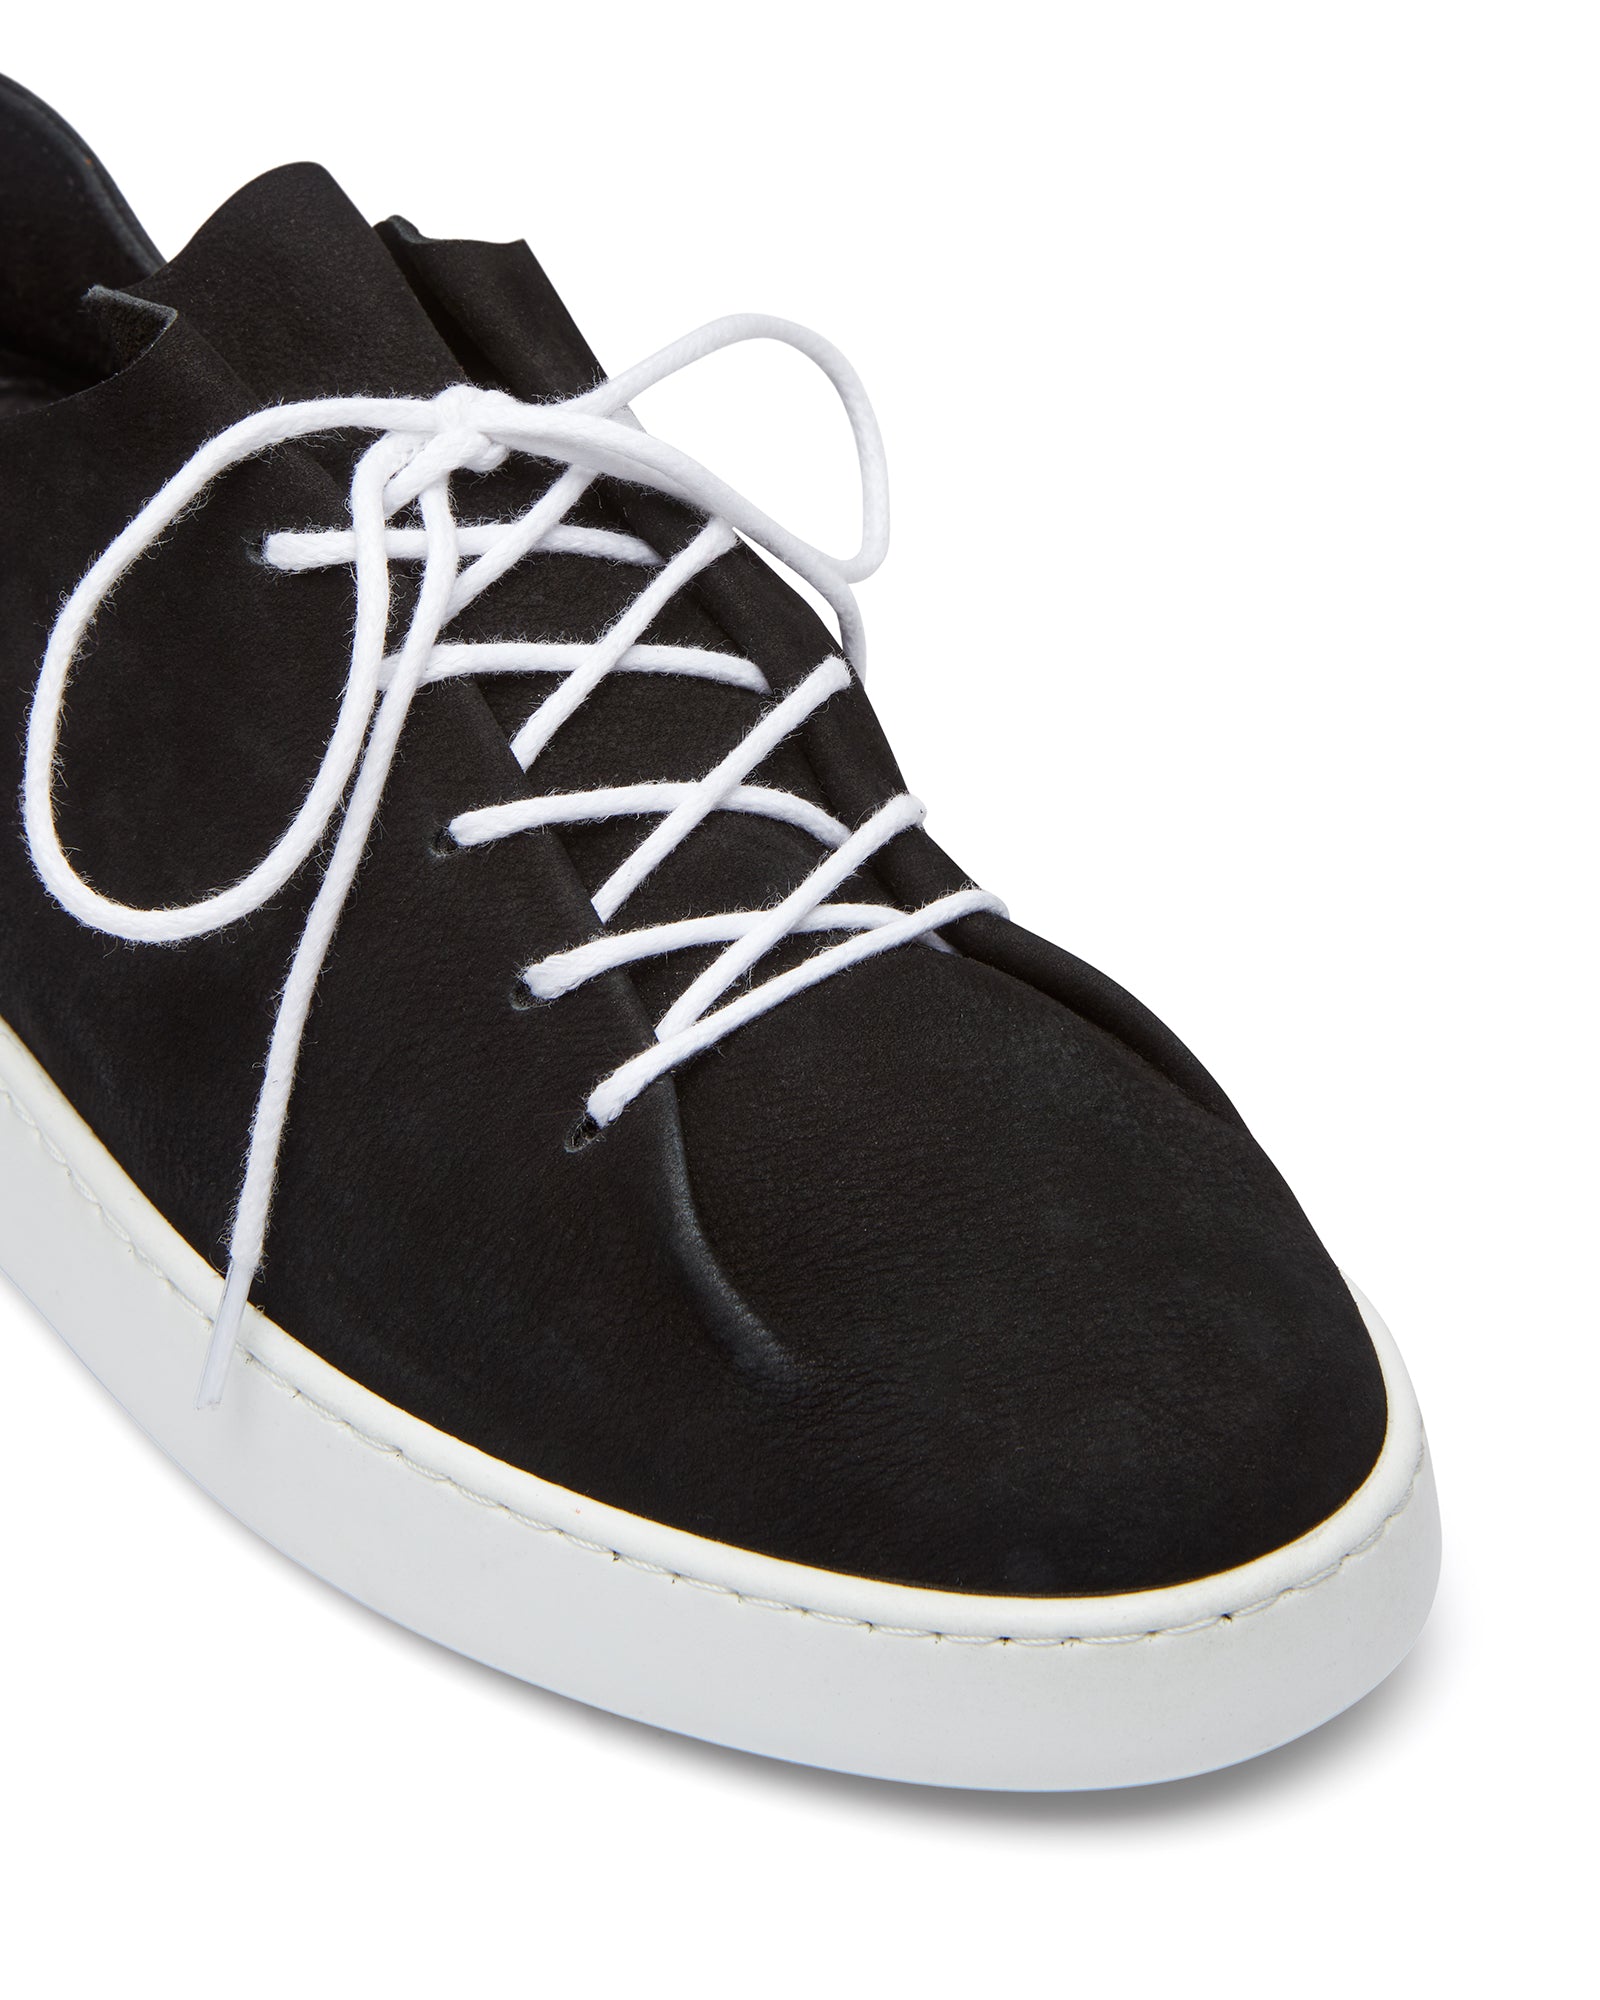 Just Because Shoes Angie Black | Leather Sneaker | Lace Up | Platform